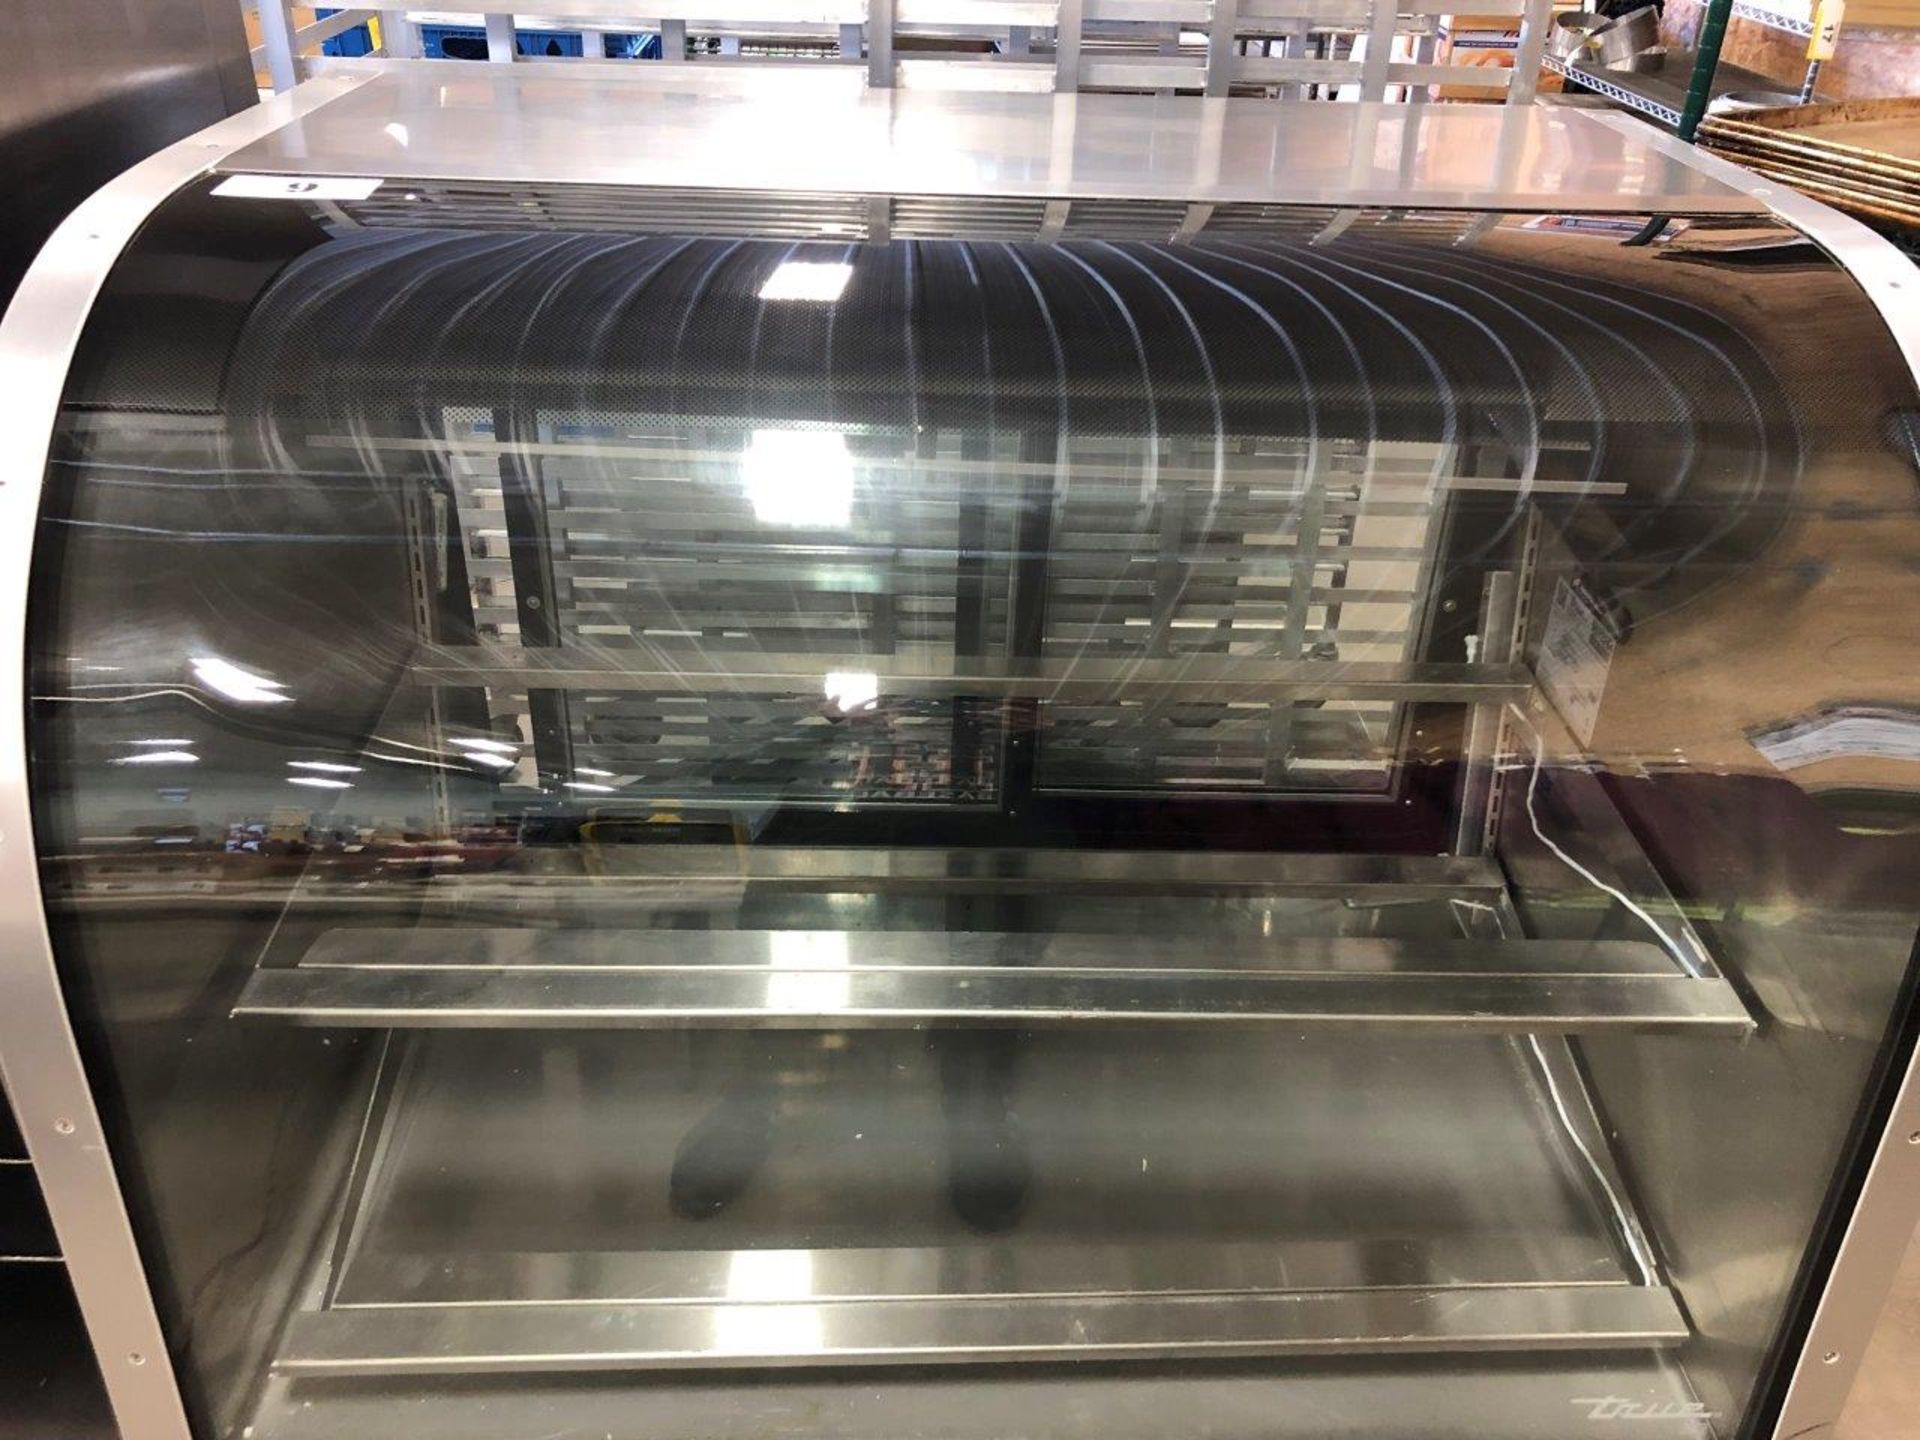 TRUE TCGG-48-S-LD FULL-SERVICE DELI CASE W/CURVED GLASS, S/N 9573264 - Image 3 of 3